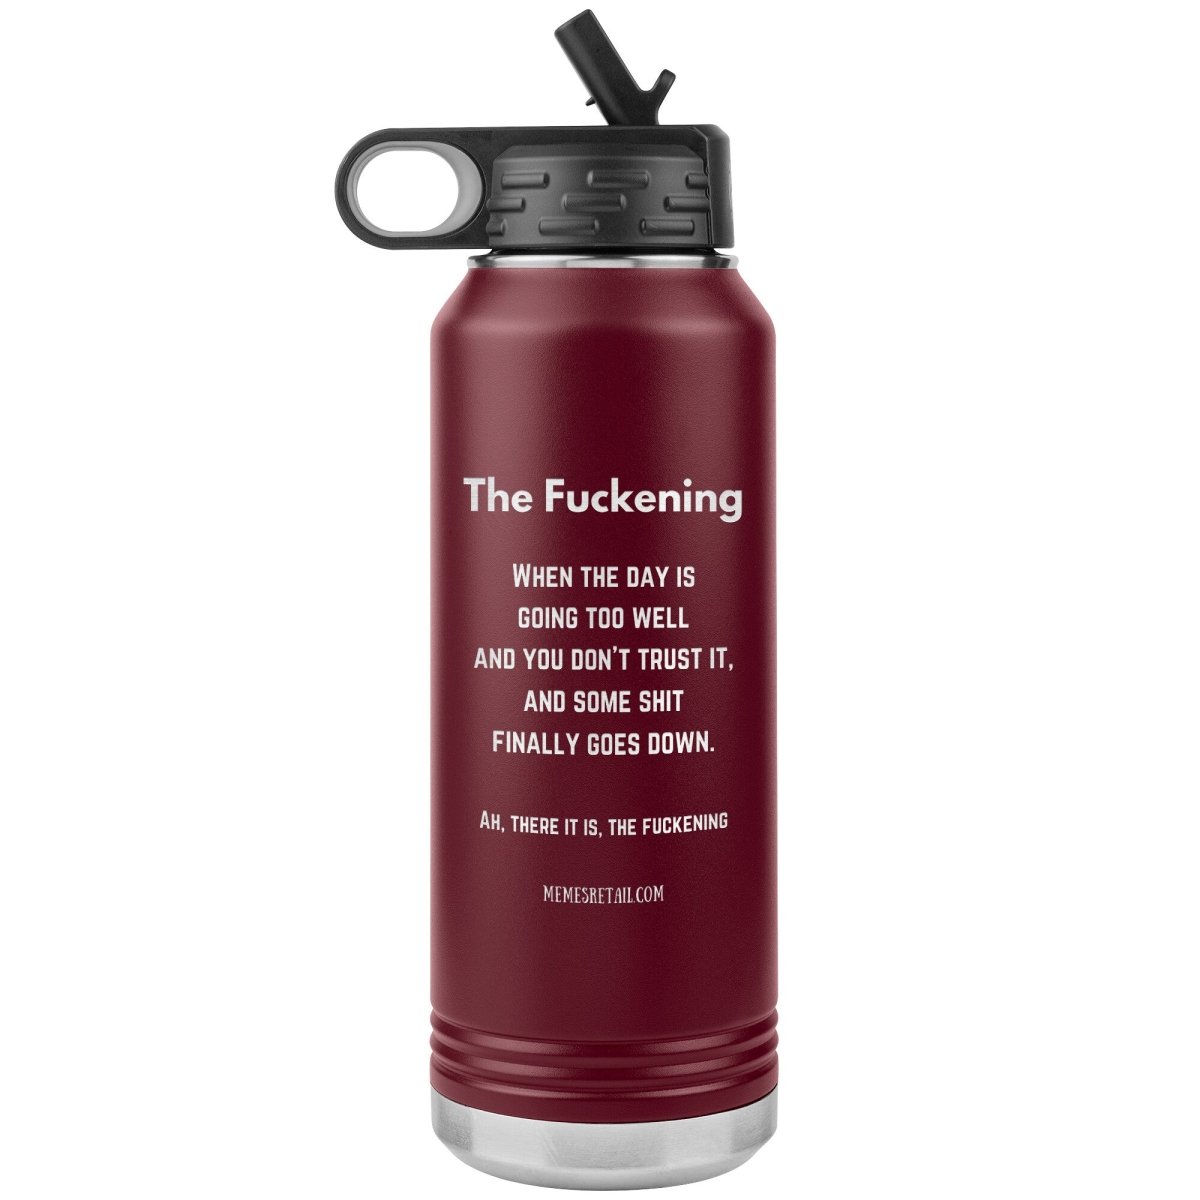 The Fuckening, When you don't trust the day. 32 oz Water Bottle, Maroon - MemesRetail.com